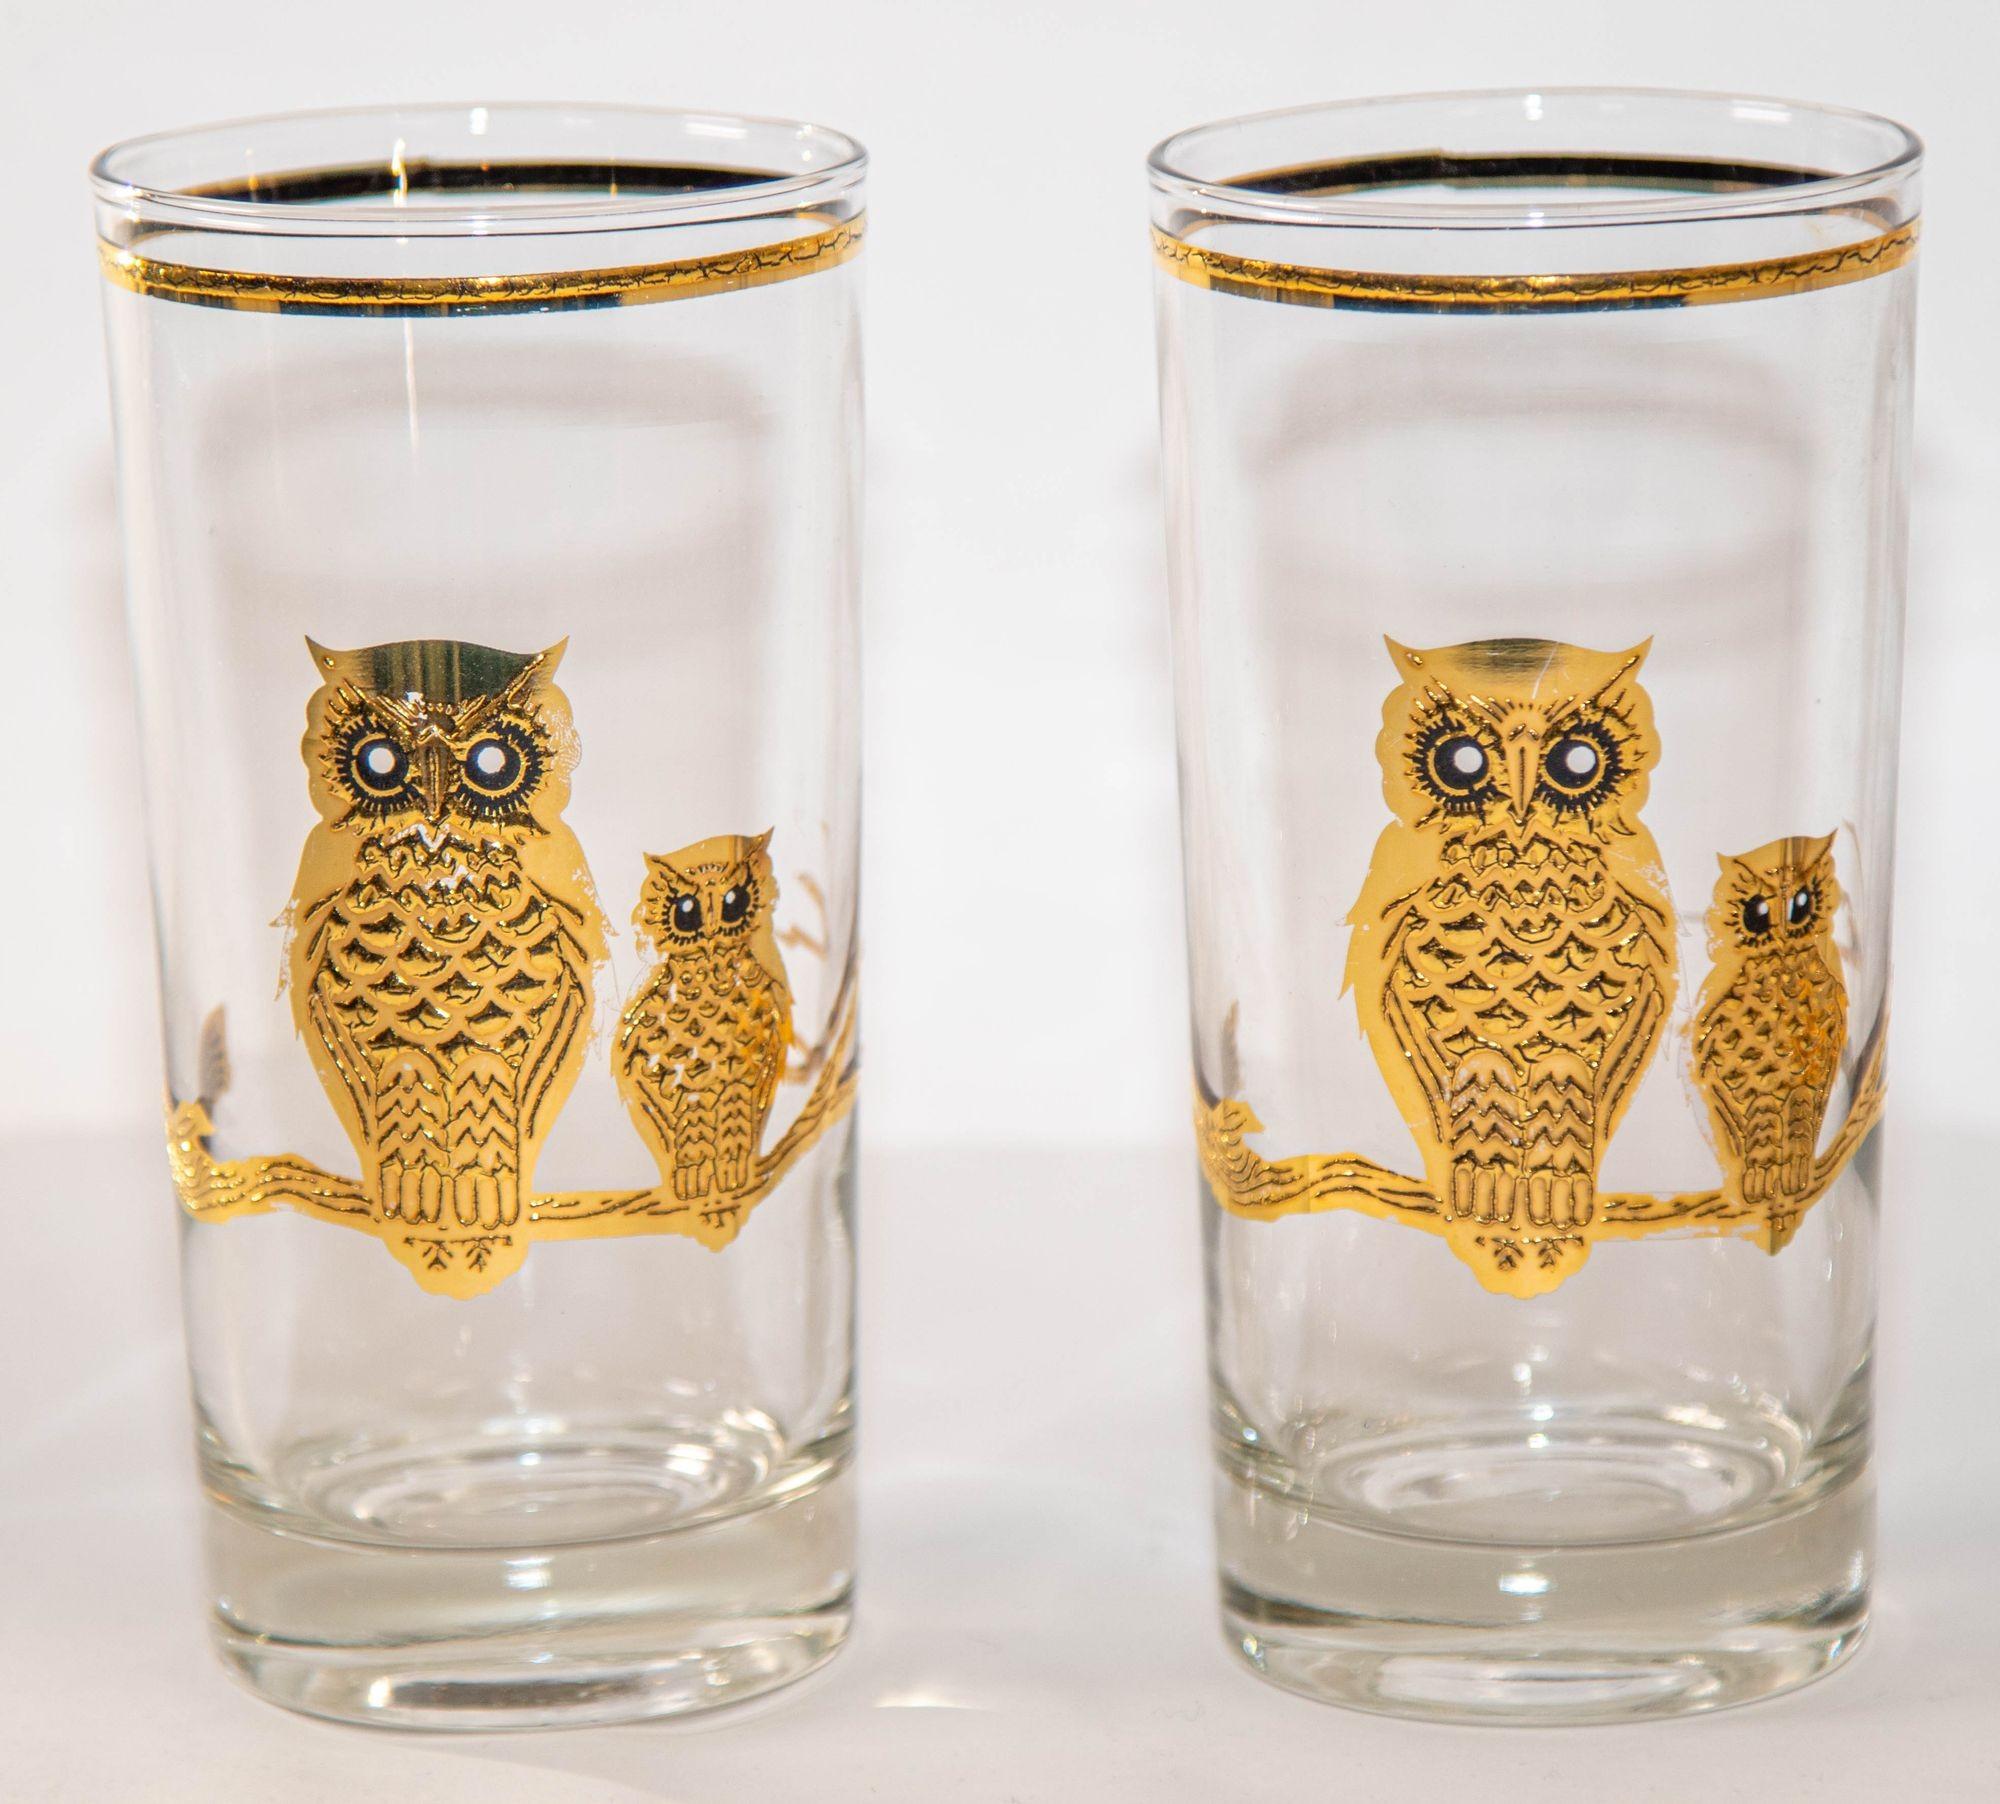 Vintage Culver Ltd Highball Drinking Glasses with 22K Gold Owls, Set of 6 Circa 1950's.
Vintage Mid-Century Modern Gold Embossed Culver Owl highball glasses set of 6.
Wonderful vintage mid-century modern 6 gold embossed owl Tom Collins Culver